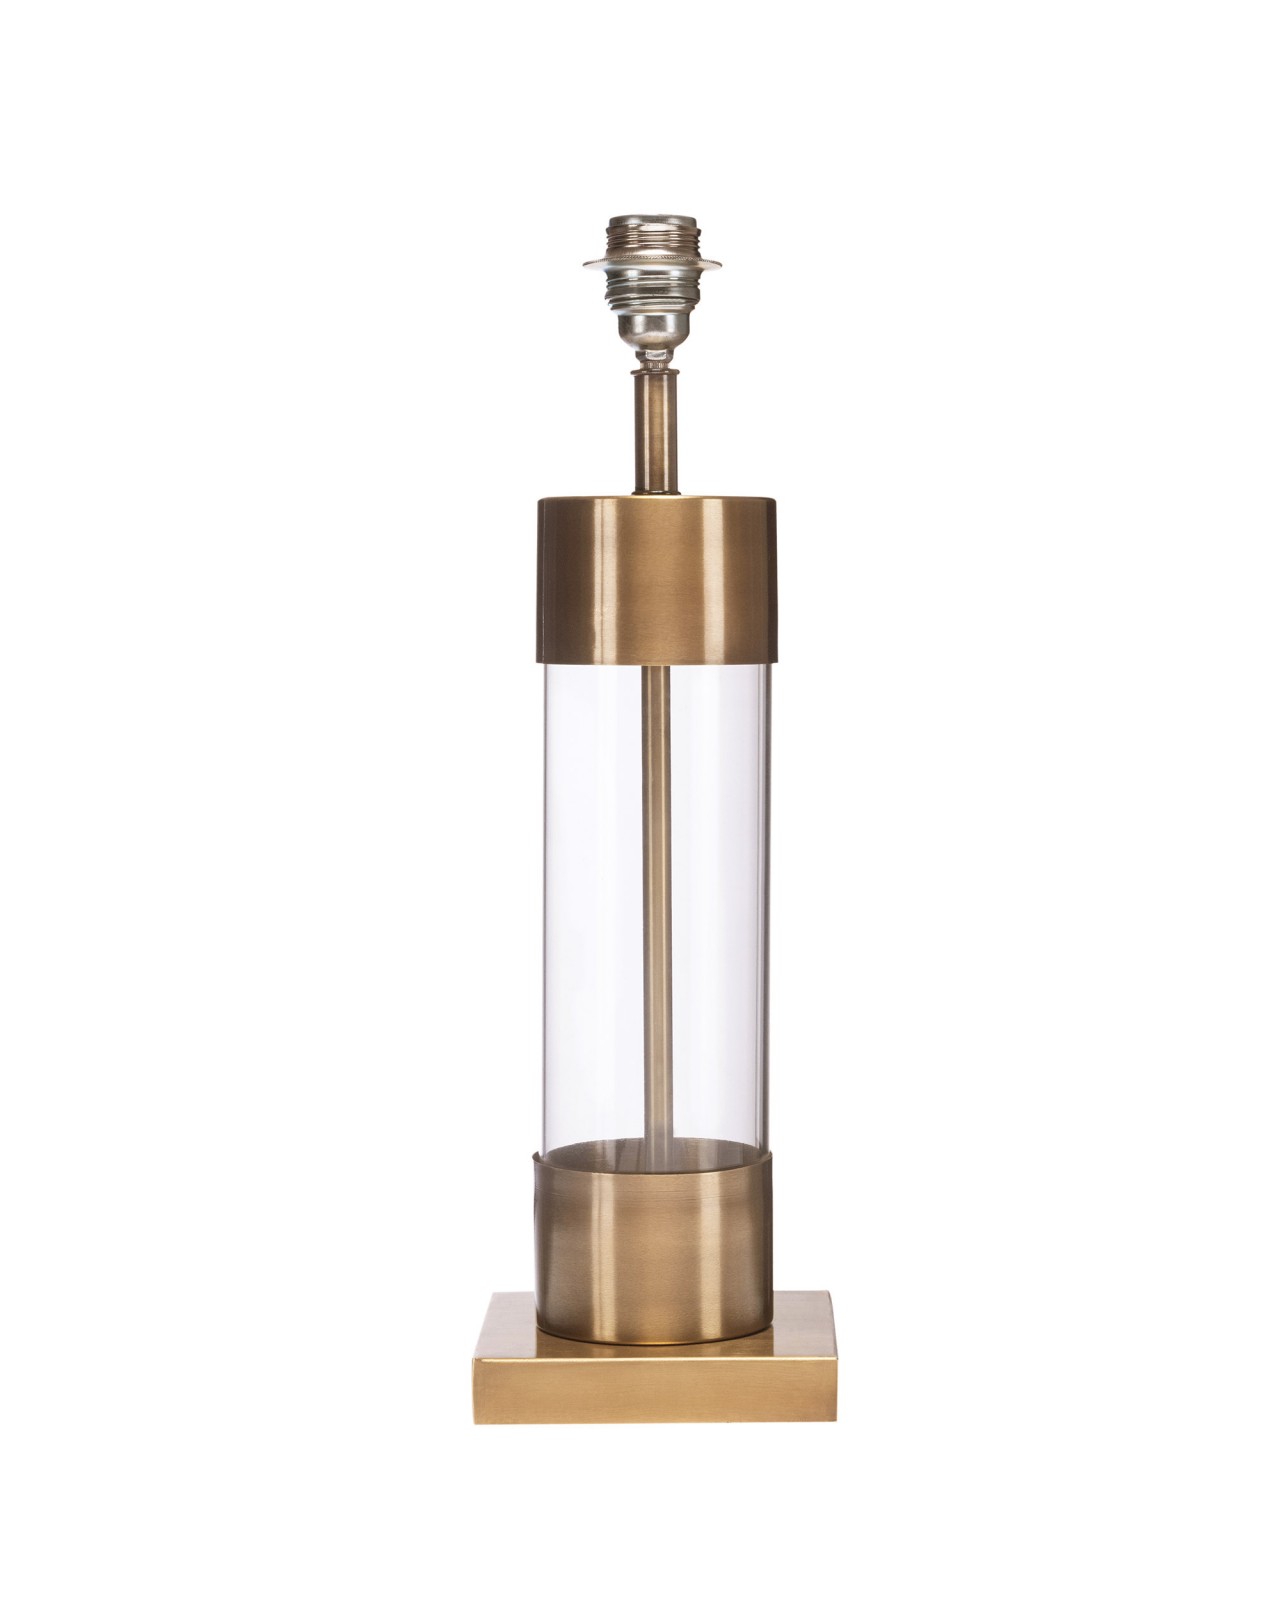 SIBELLA Table Lamp in Antique Brass